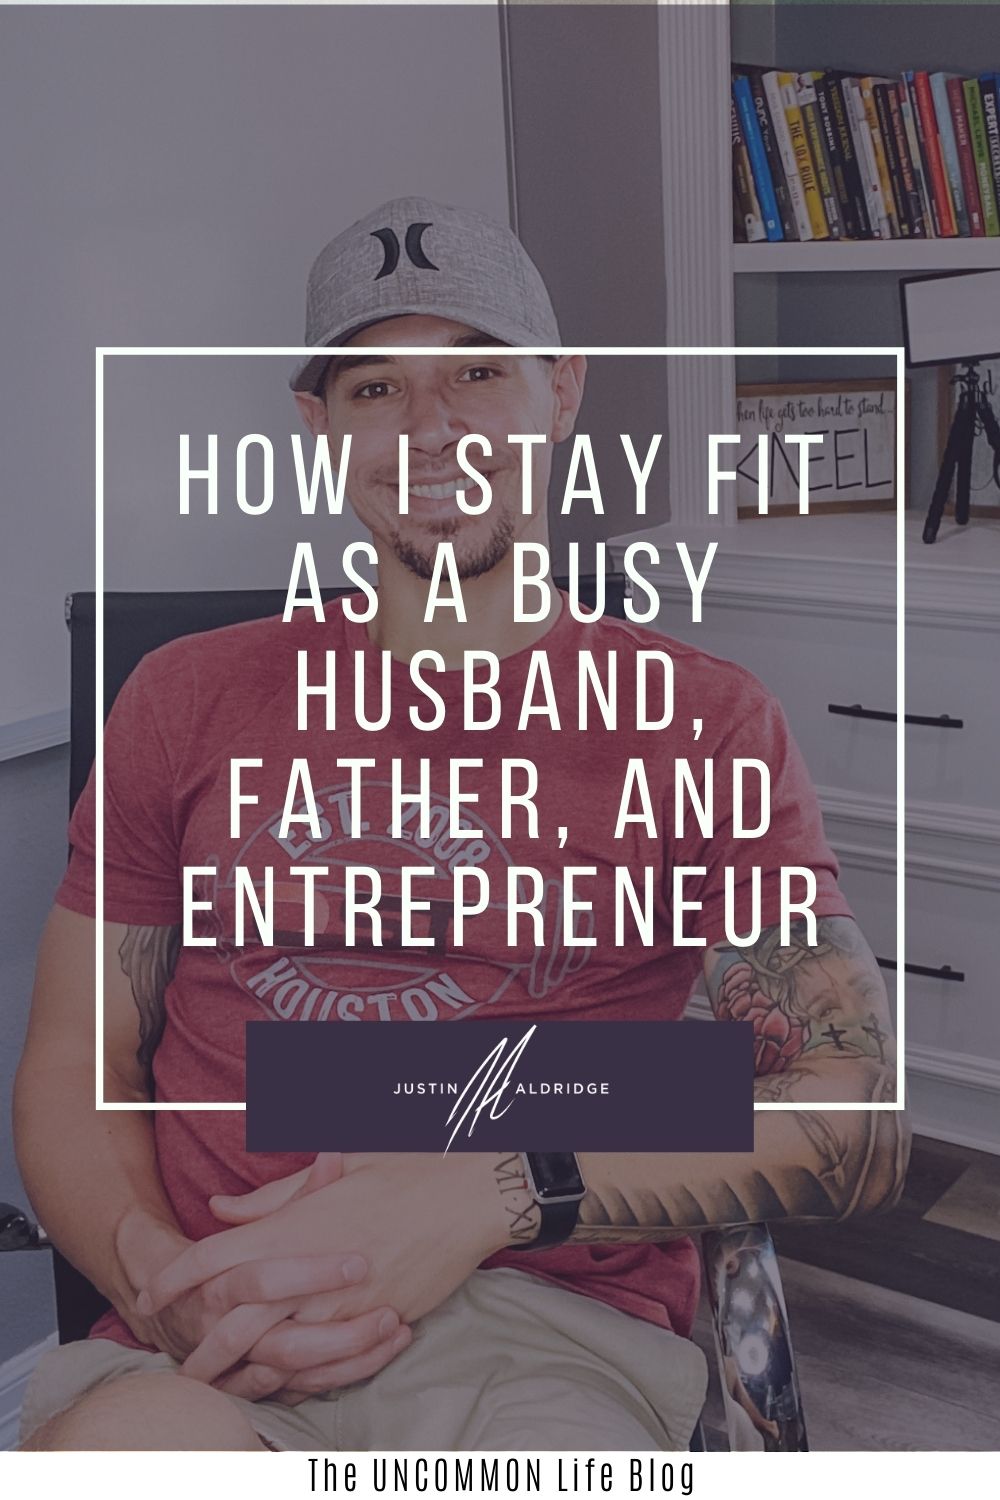 Picture of a man sitting in a chair in the background behind the text, "How I stay fit as a busy husband, father, and entrepreneur"